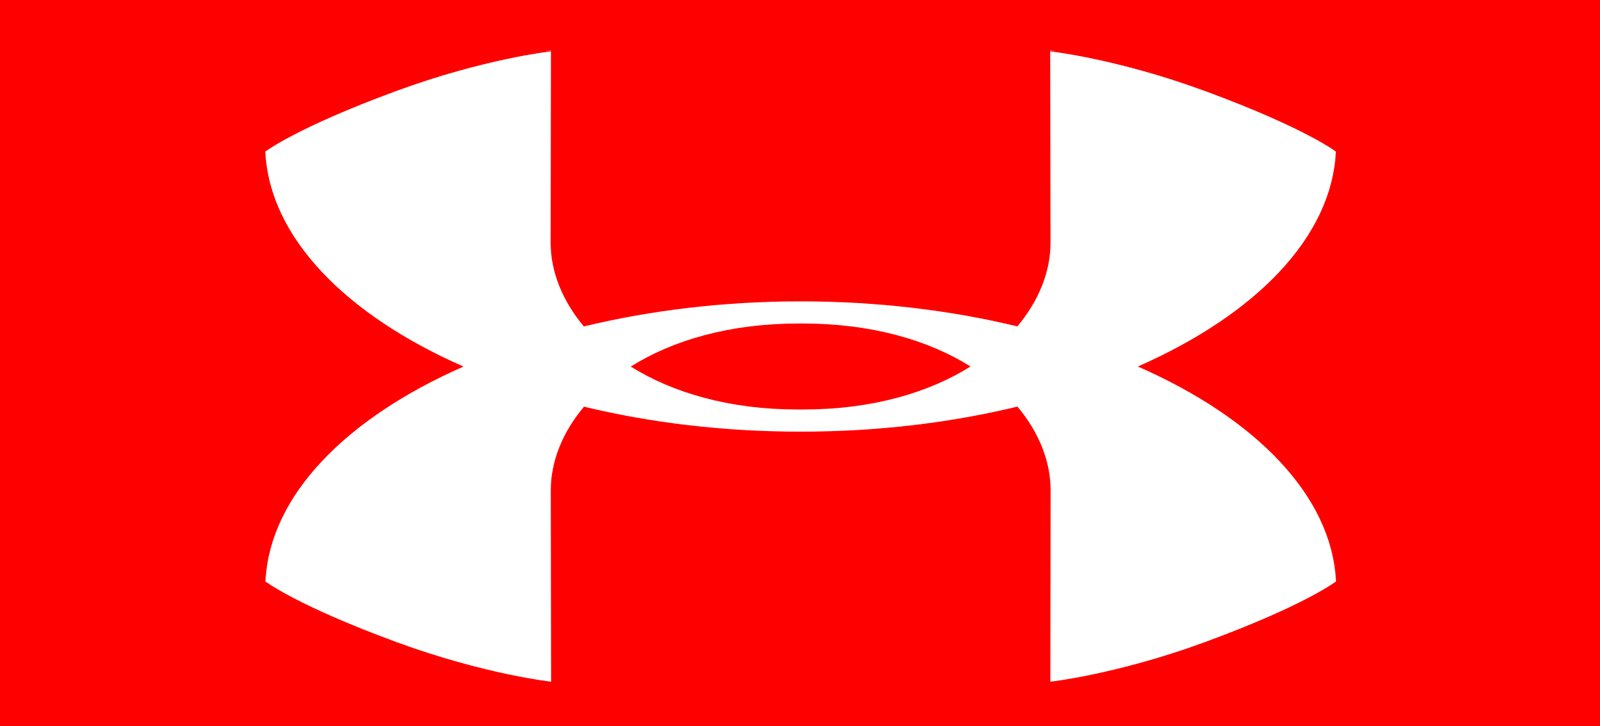 Under Armour Logo, Under Armour Symbol, Meaning, History ...